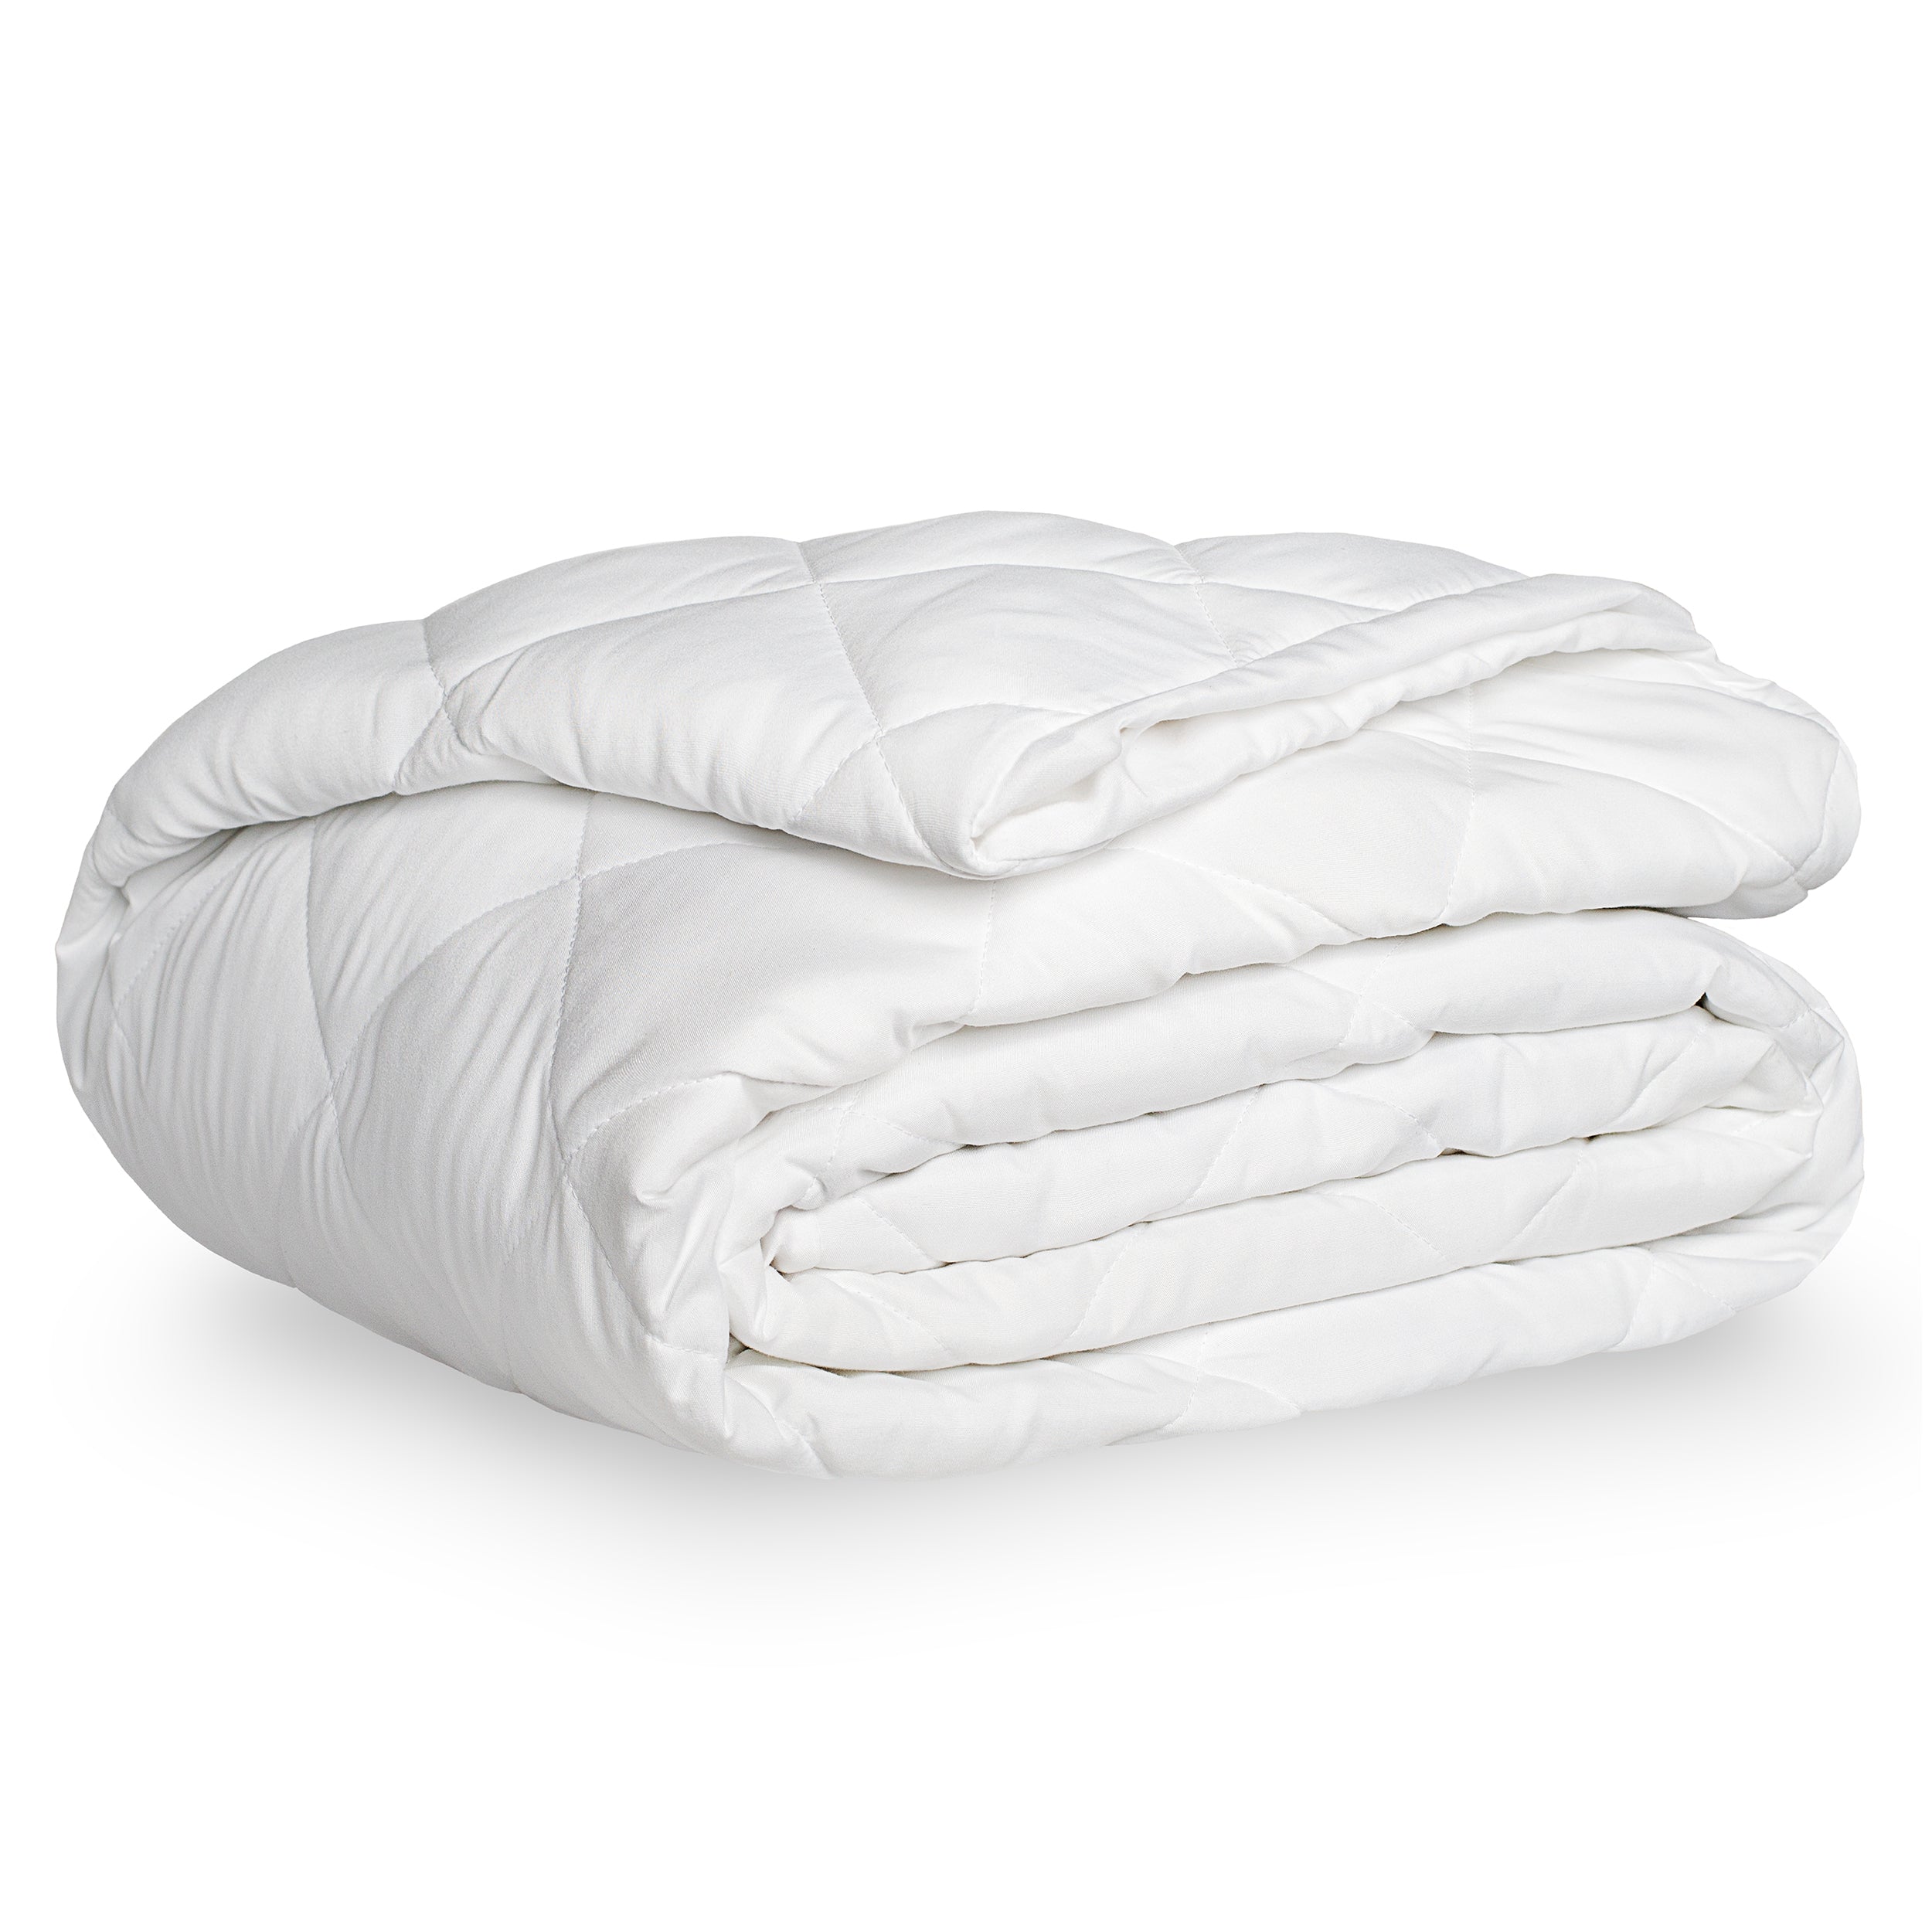 Folded quilted mattress pad